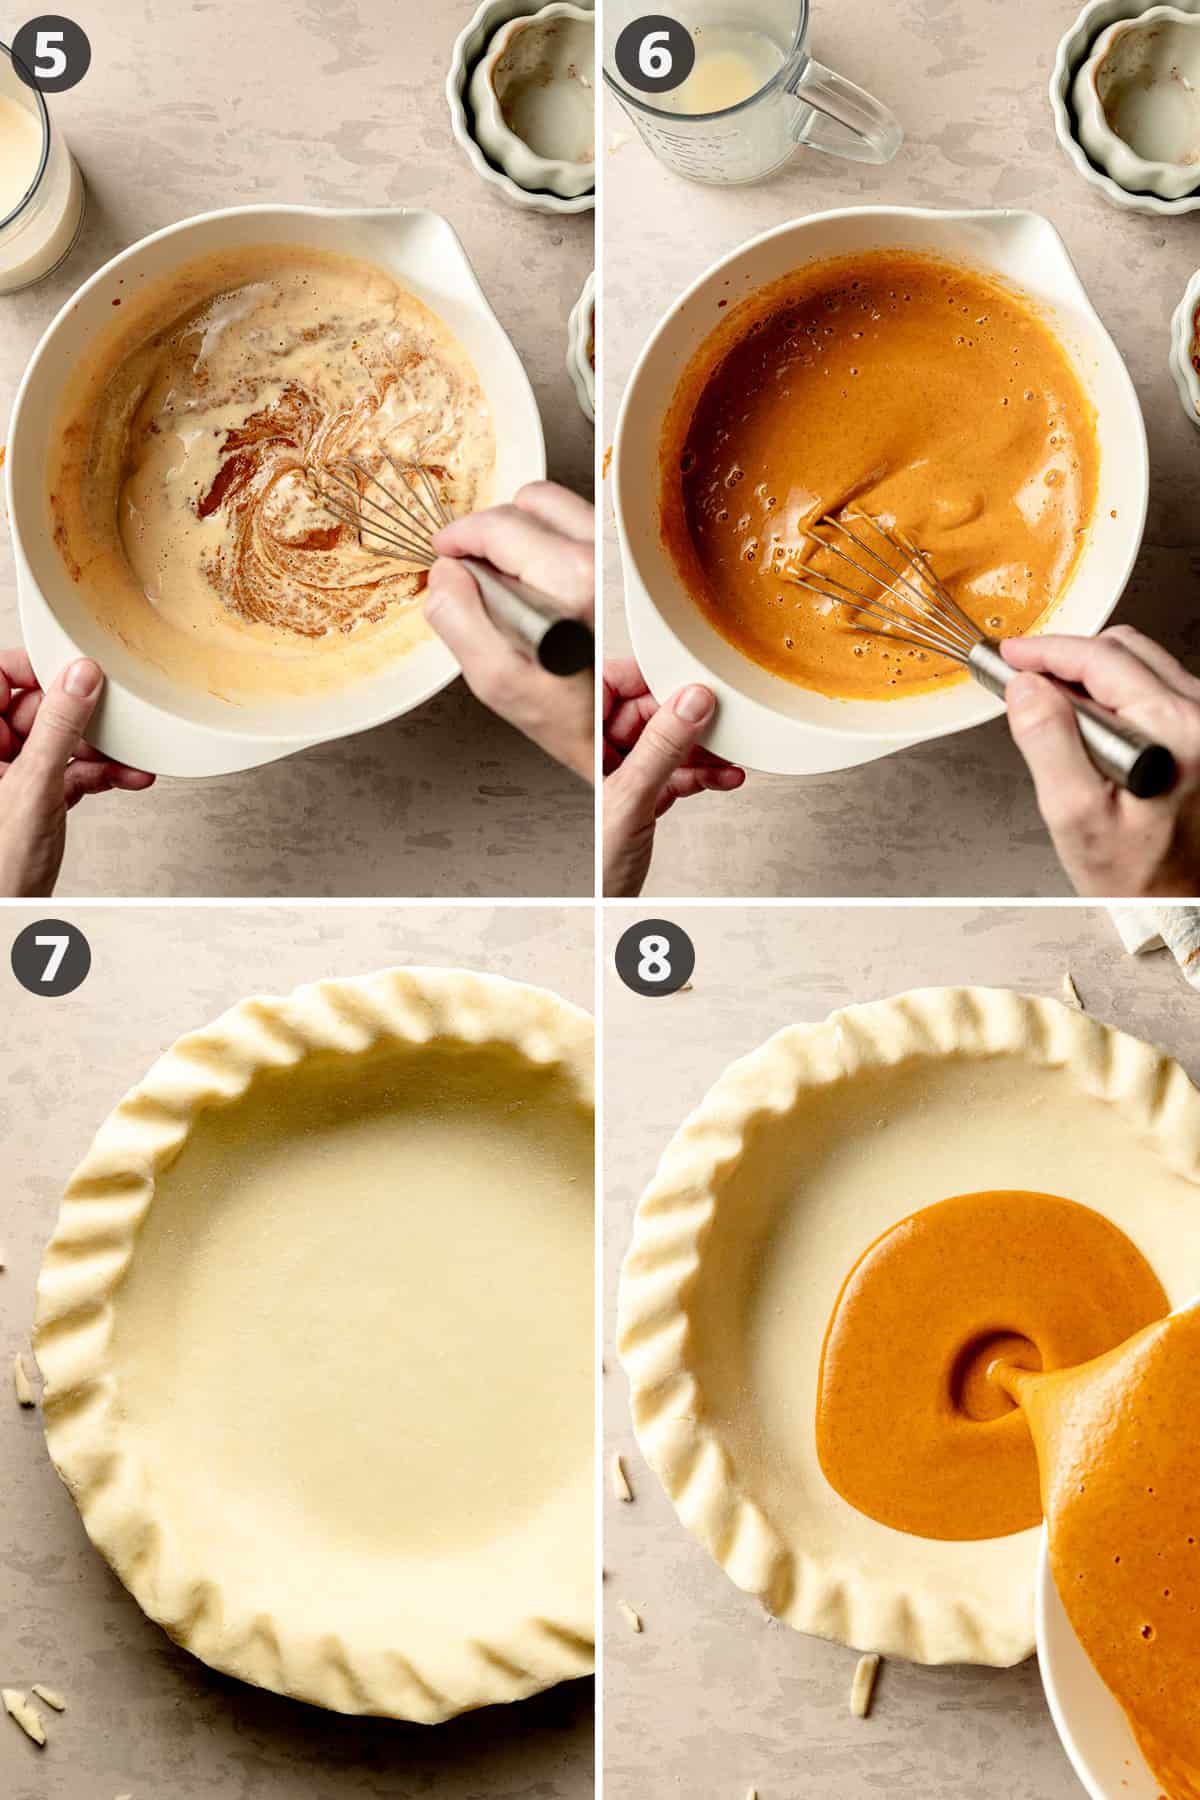 Pouring pumpkin pie filling into prepared pie pan with crimped crust.